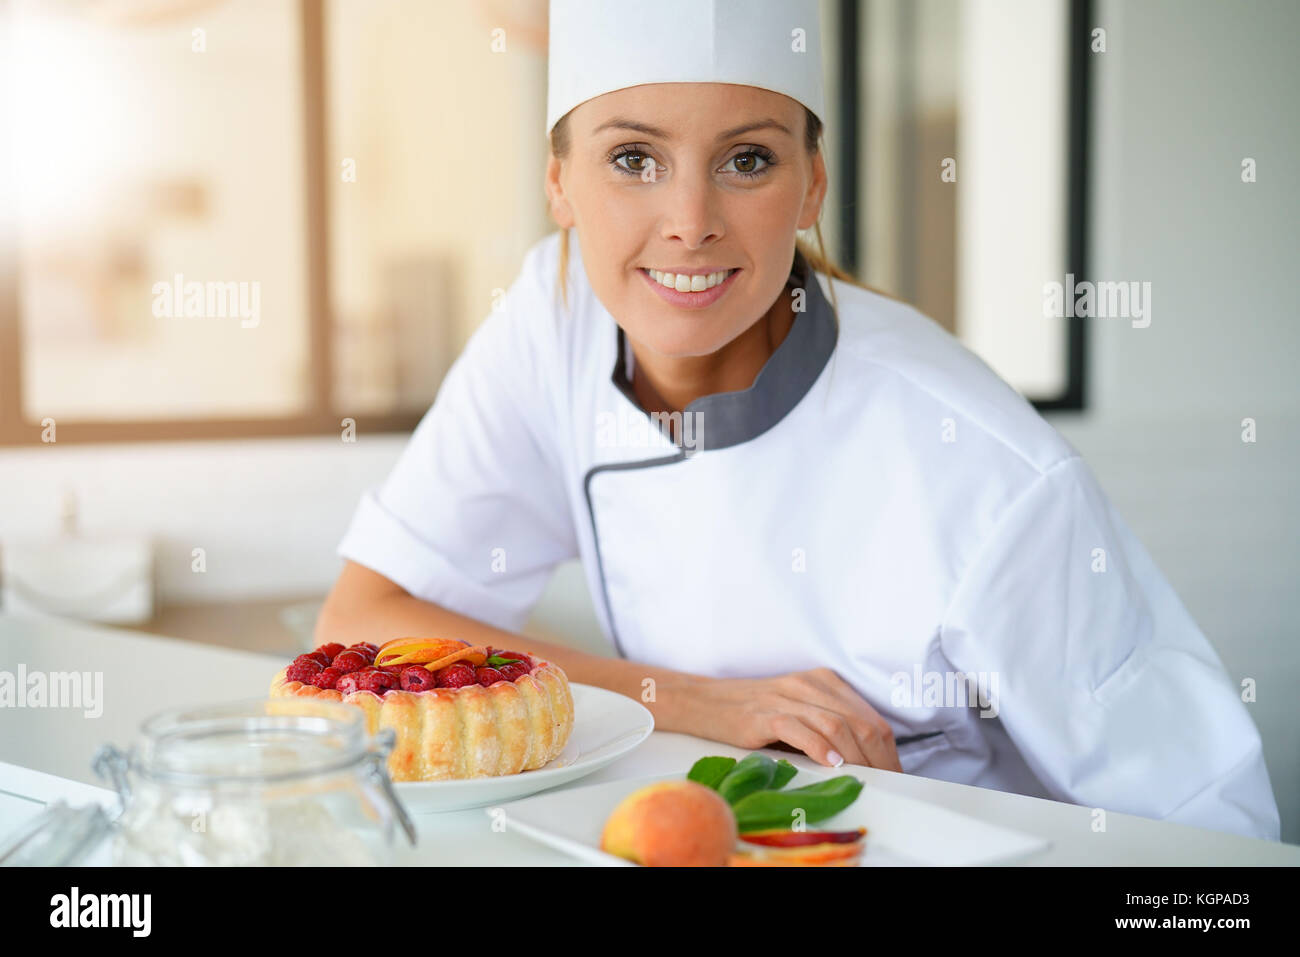 Portrait of pastry chef standing by raspberry cake Stock Photo